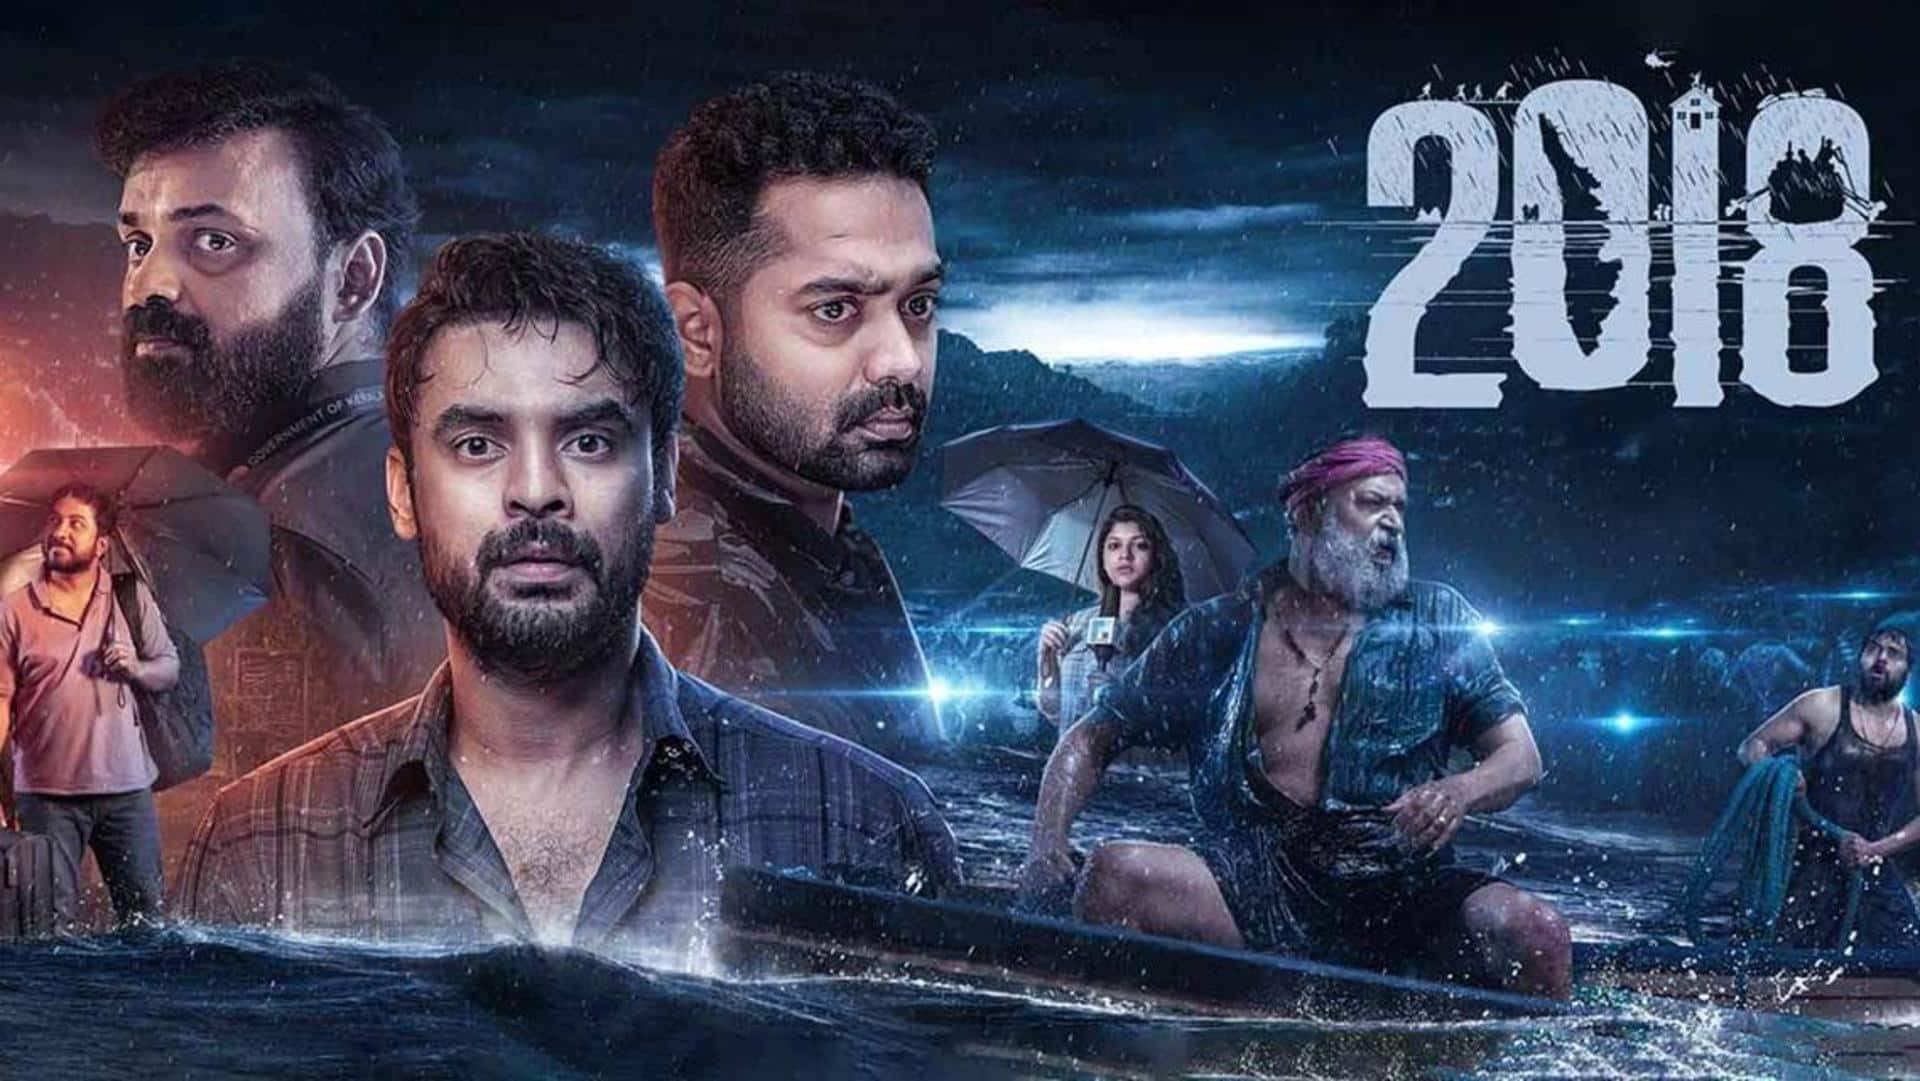 #BoxOfficeCollection: '2018' is quite steady in its third week